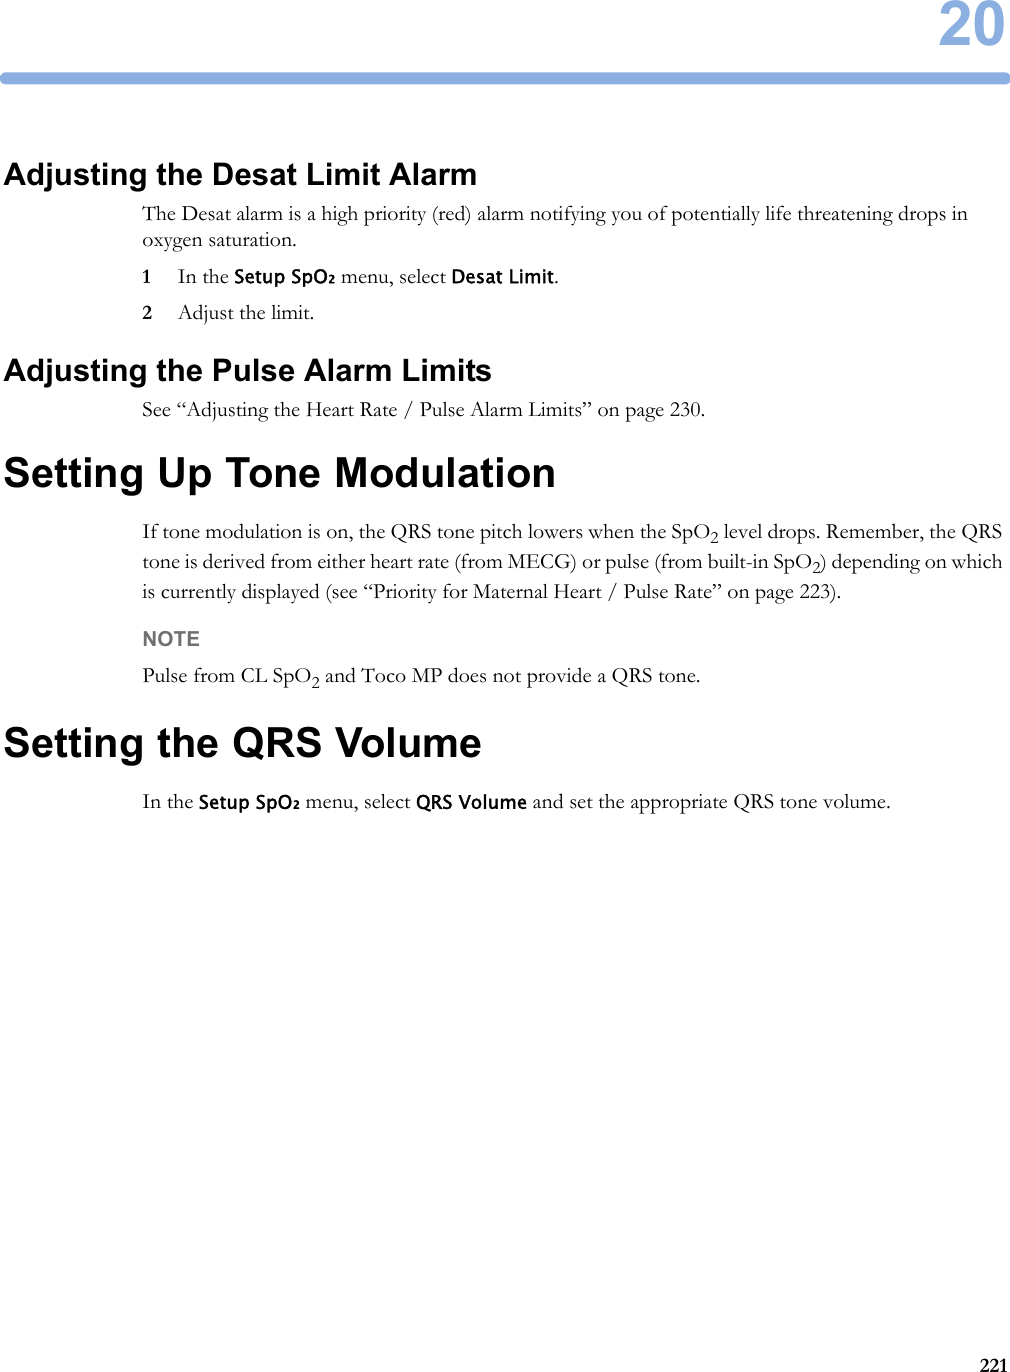 20221Adjusting the Desat Limit AlarmThe Desat alarm is a high priority (red) alarm notifying you of potentially life threatening drops in oxygen saturation.1In the Setup SpO₂ menu, select Desat Limit.2Adjust the limit.Adjusting the Pulse Alarm LimitsSee “Adjusting the Heart Rate / Pulse Alarm Limits” on page 230.Setting Up Tone ModulationIf tone modulation is on, the QRS tone pitch lowers when the SpO2 level drops. Remember, the QRS tone is derived from either heart rate (from MECG) or pulse (from built-in SpO2) depending on which is currently displayed (see “Priority for Maternal Heart / Pulse Rate” on page 223).NOTEPulse from CL SpO2 and Toco MP does not provide a QRS tone.Setting the QRS VolumeIn the Setup SpO₂ menu, select QRS Volume and set the appropriate QRS tone volume.